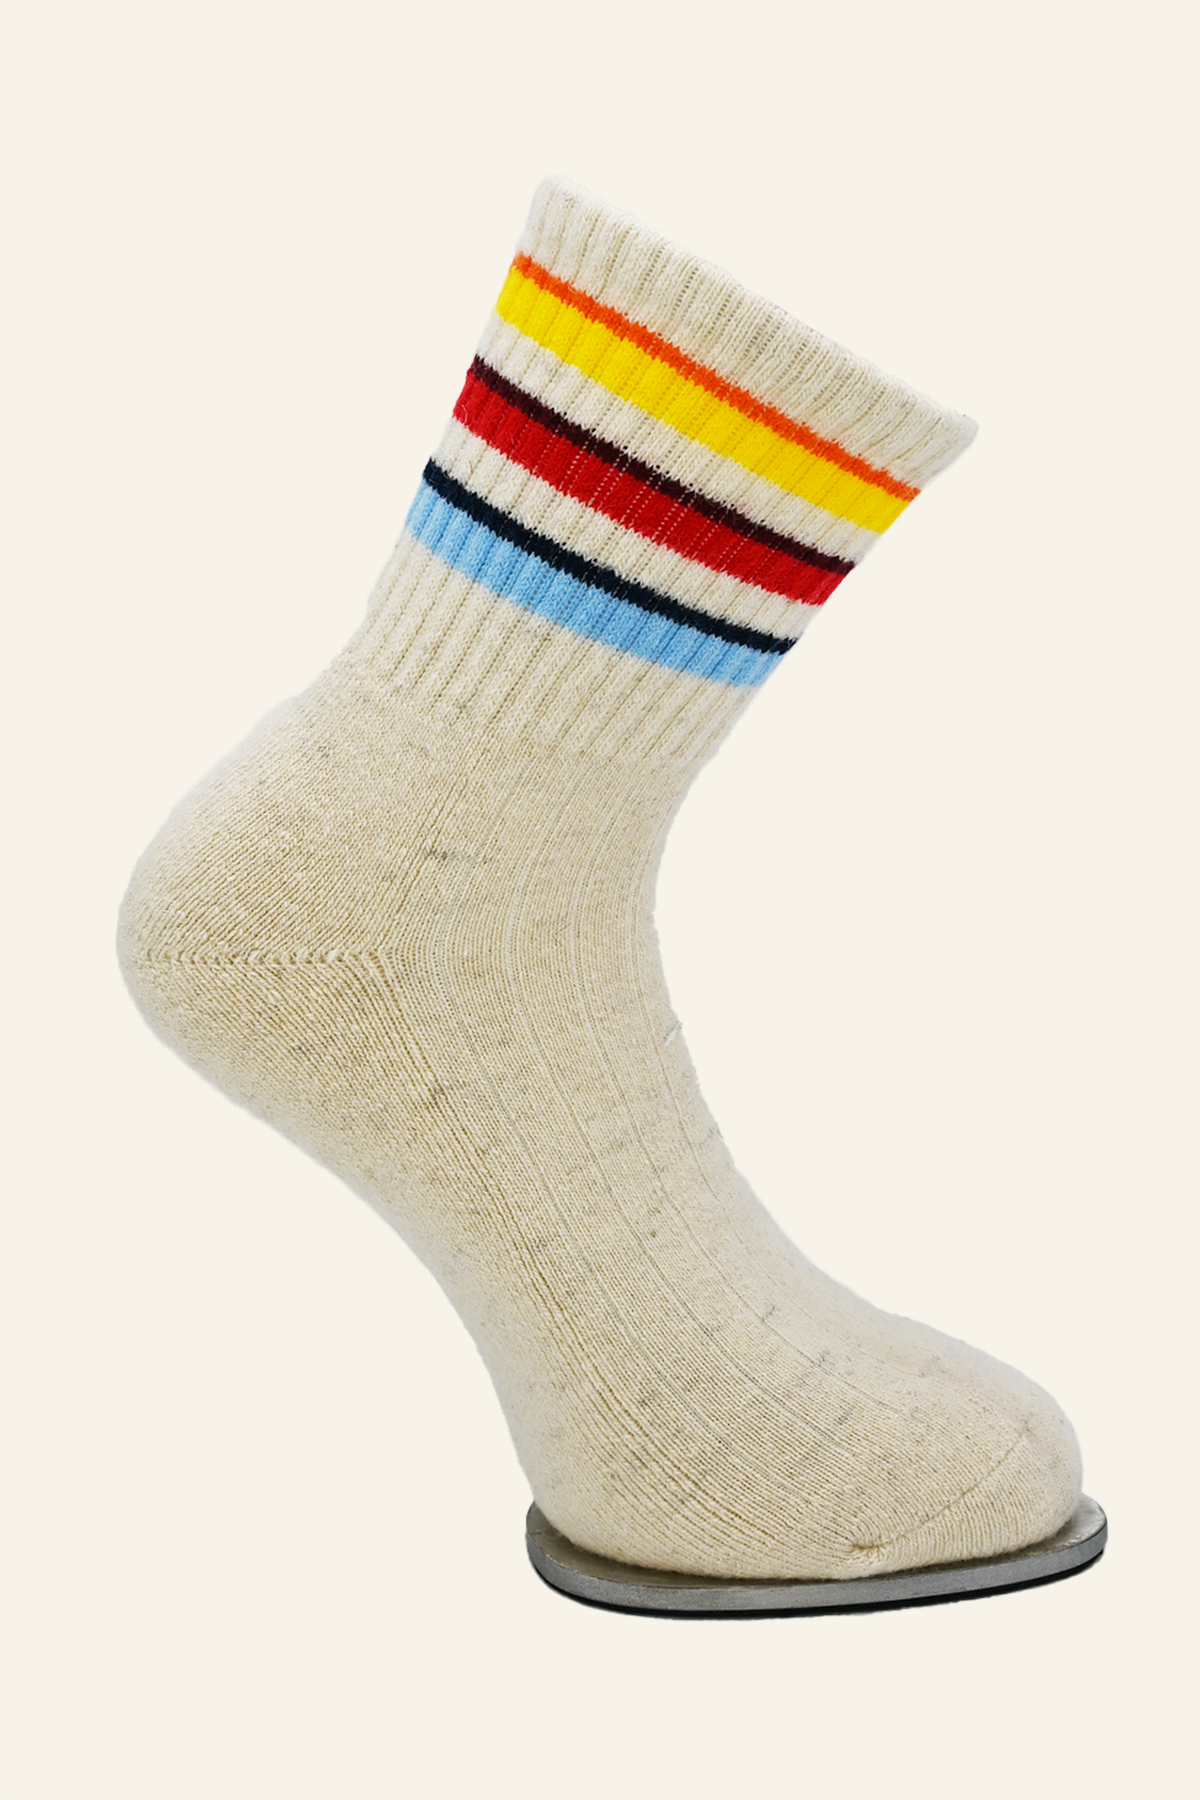 Warm Wool Socks with Colorful Ankle Detail